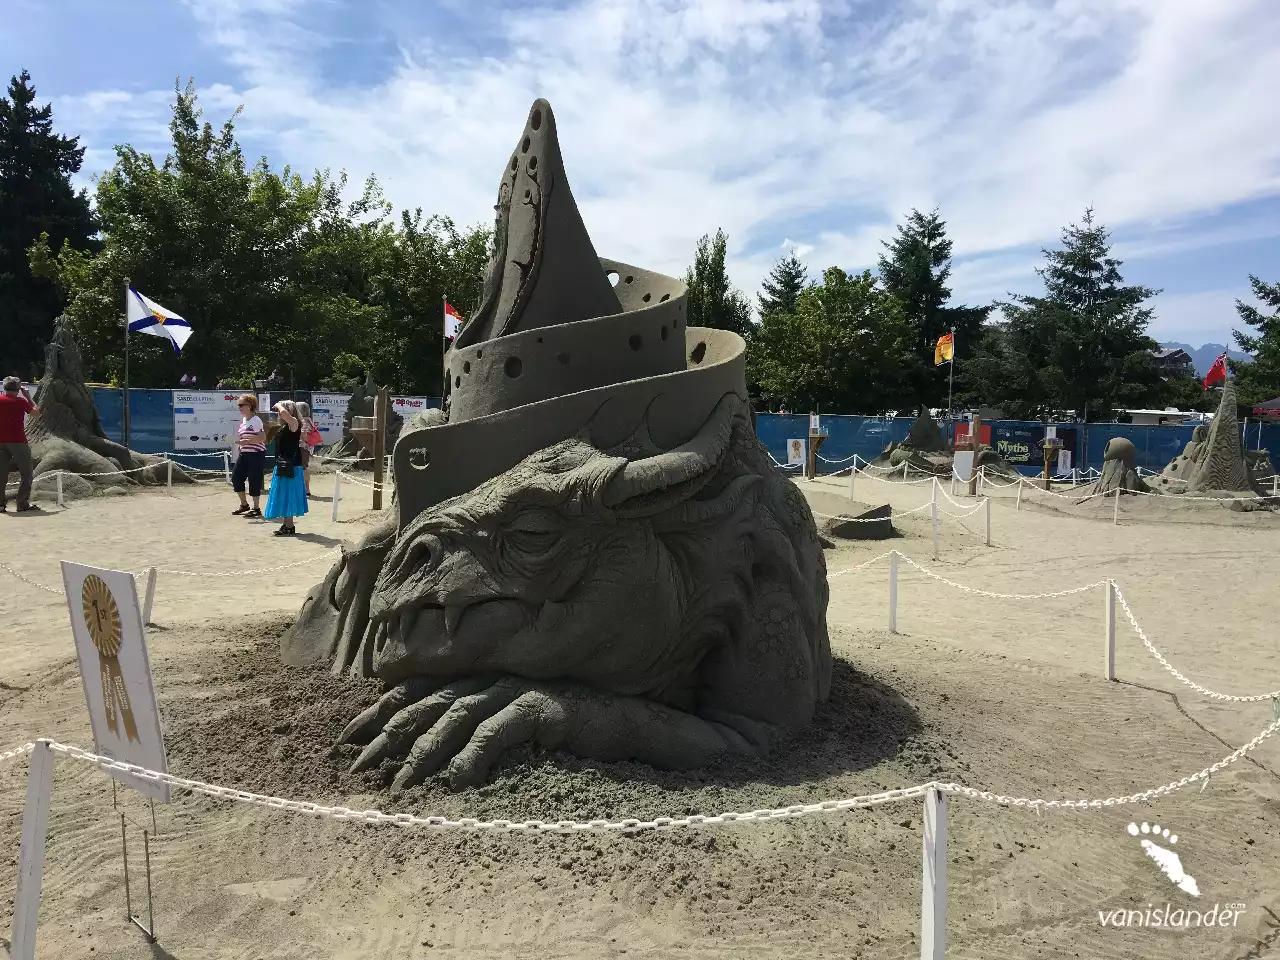 Sand statue of a sleeping dragon - Parksville Festival, Vancouver Island